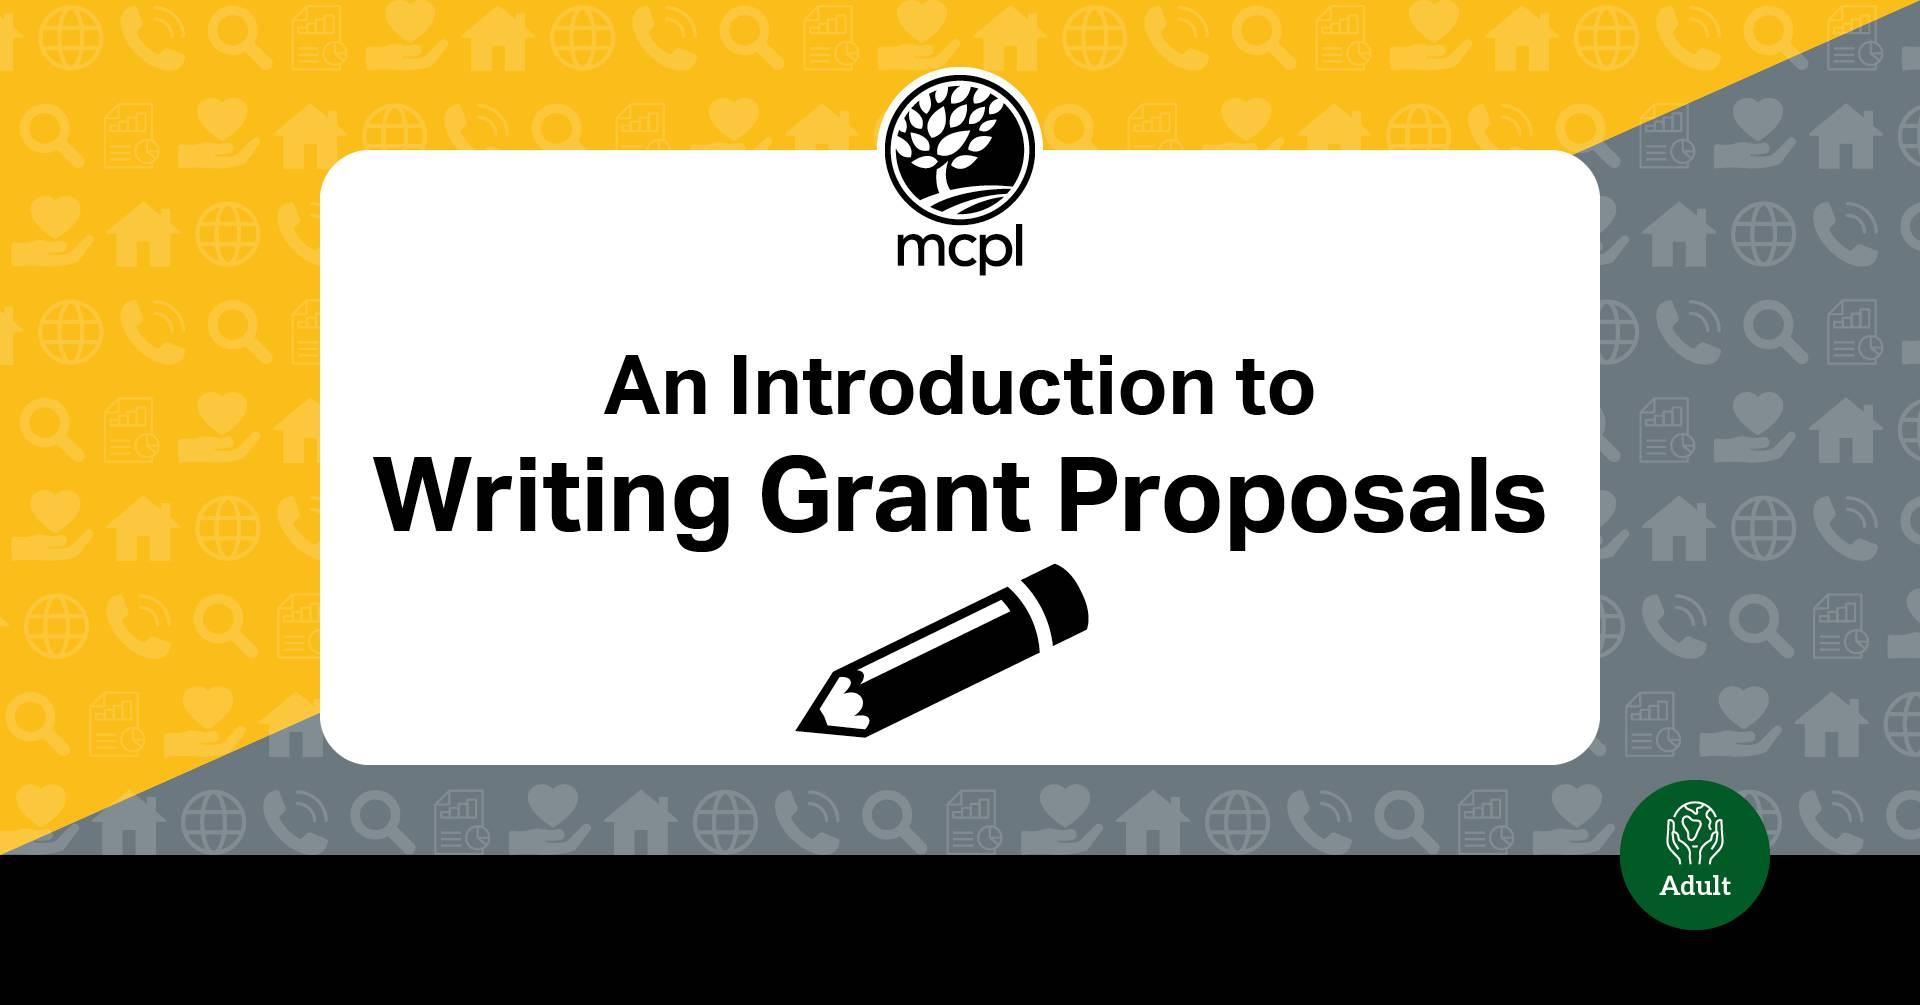 An Introduction to Writing Grant Proposals